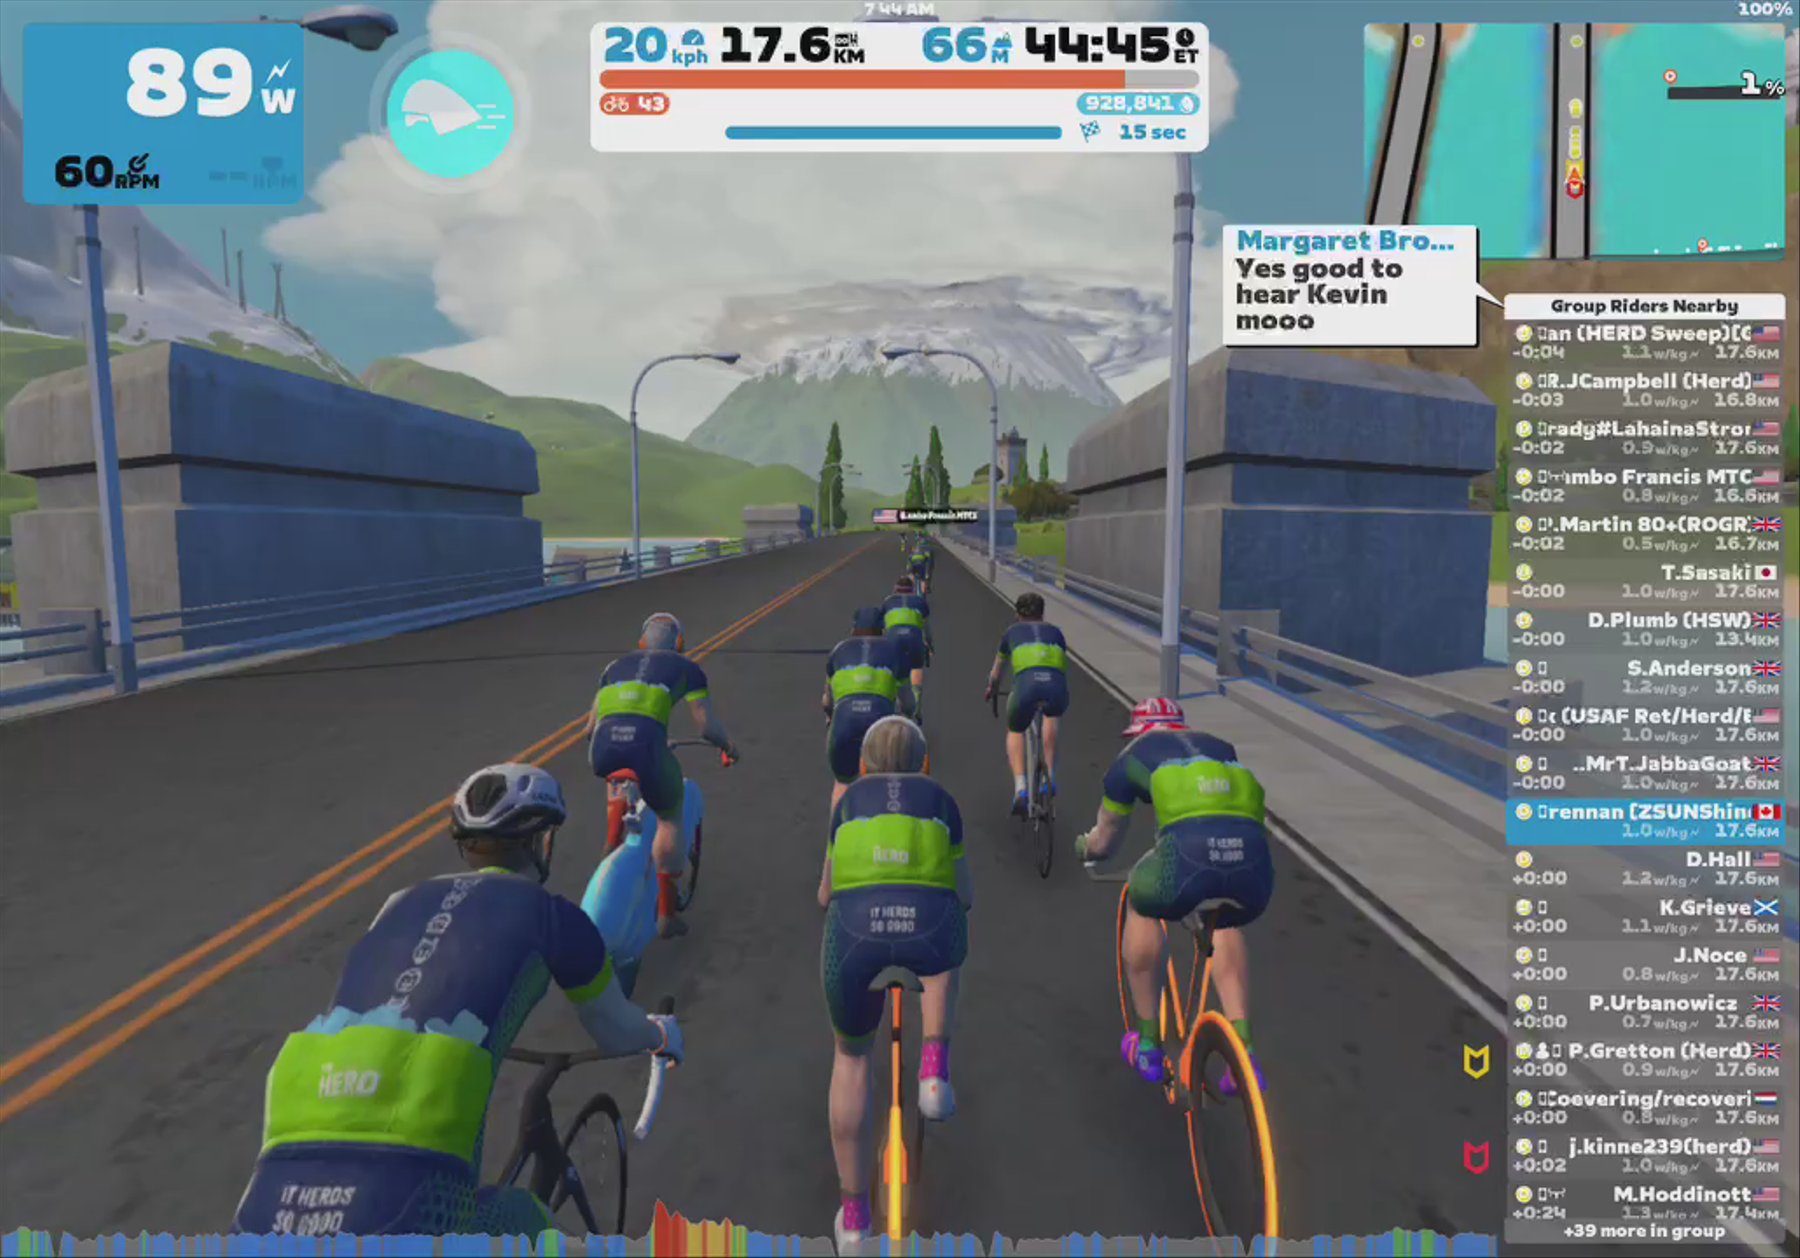 Zwift - Group Ride: The HERD Morning Ride (D) on Volcano Flat in Watopia